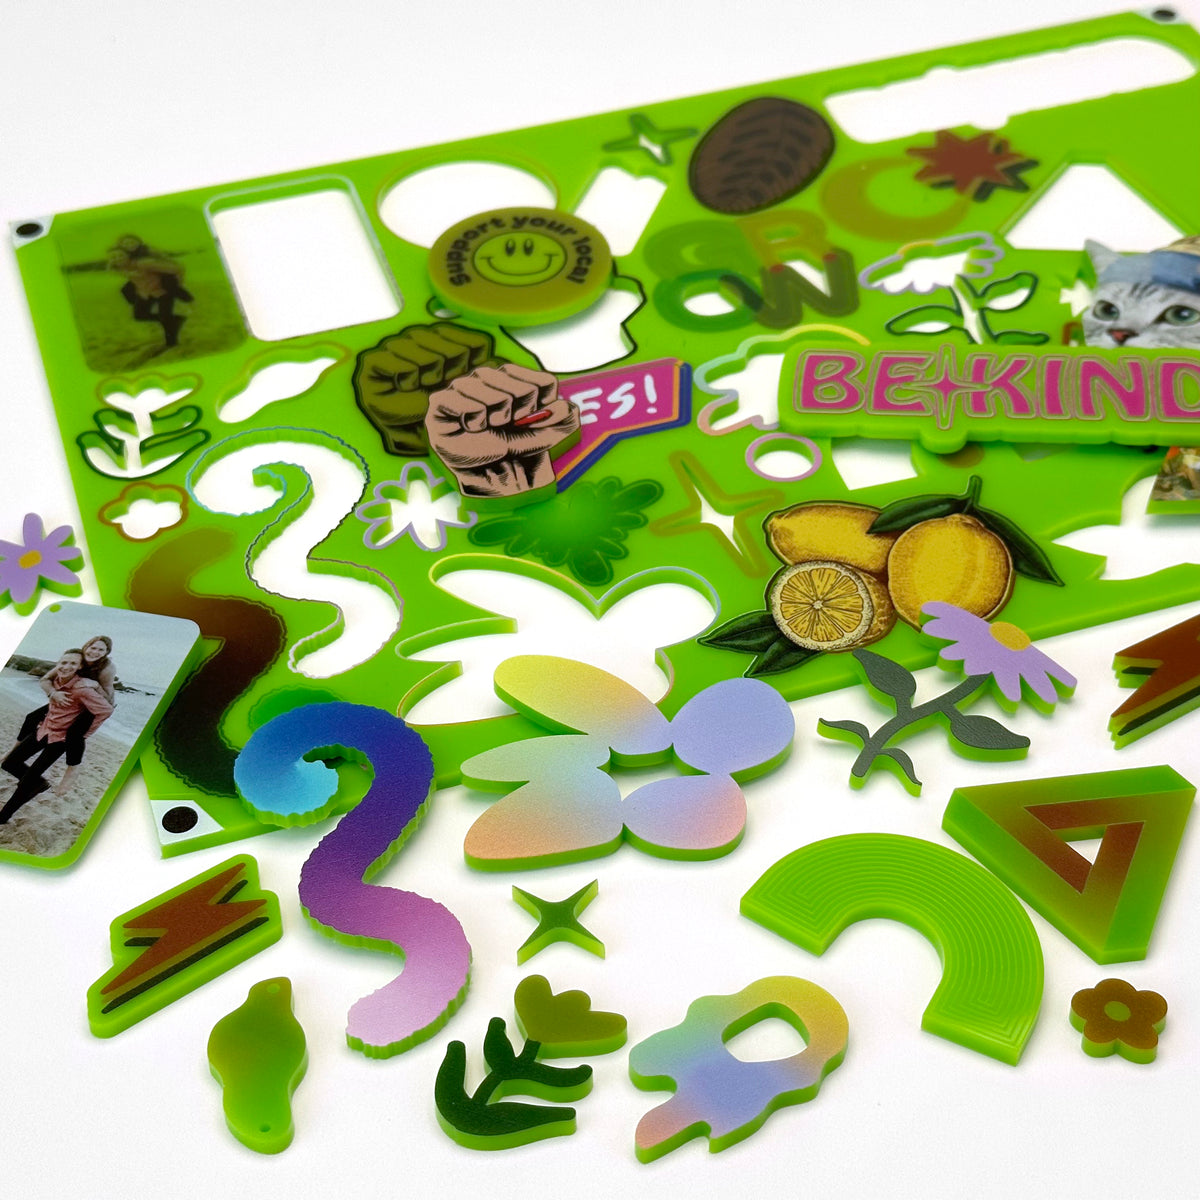 Lime Green Acrylic with laser cutting & Printing - 300x200mm